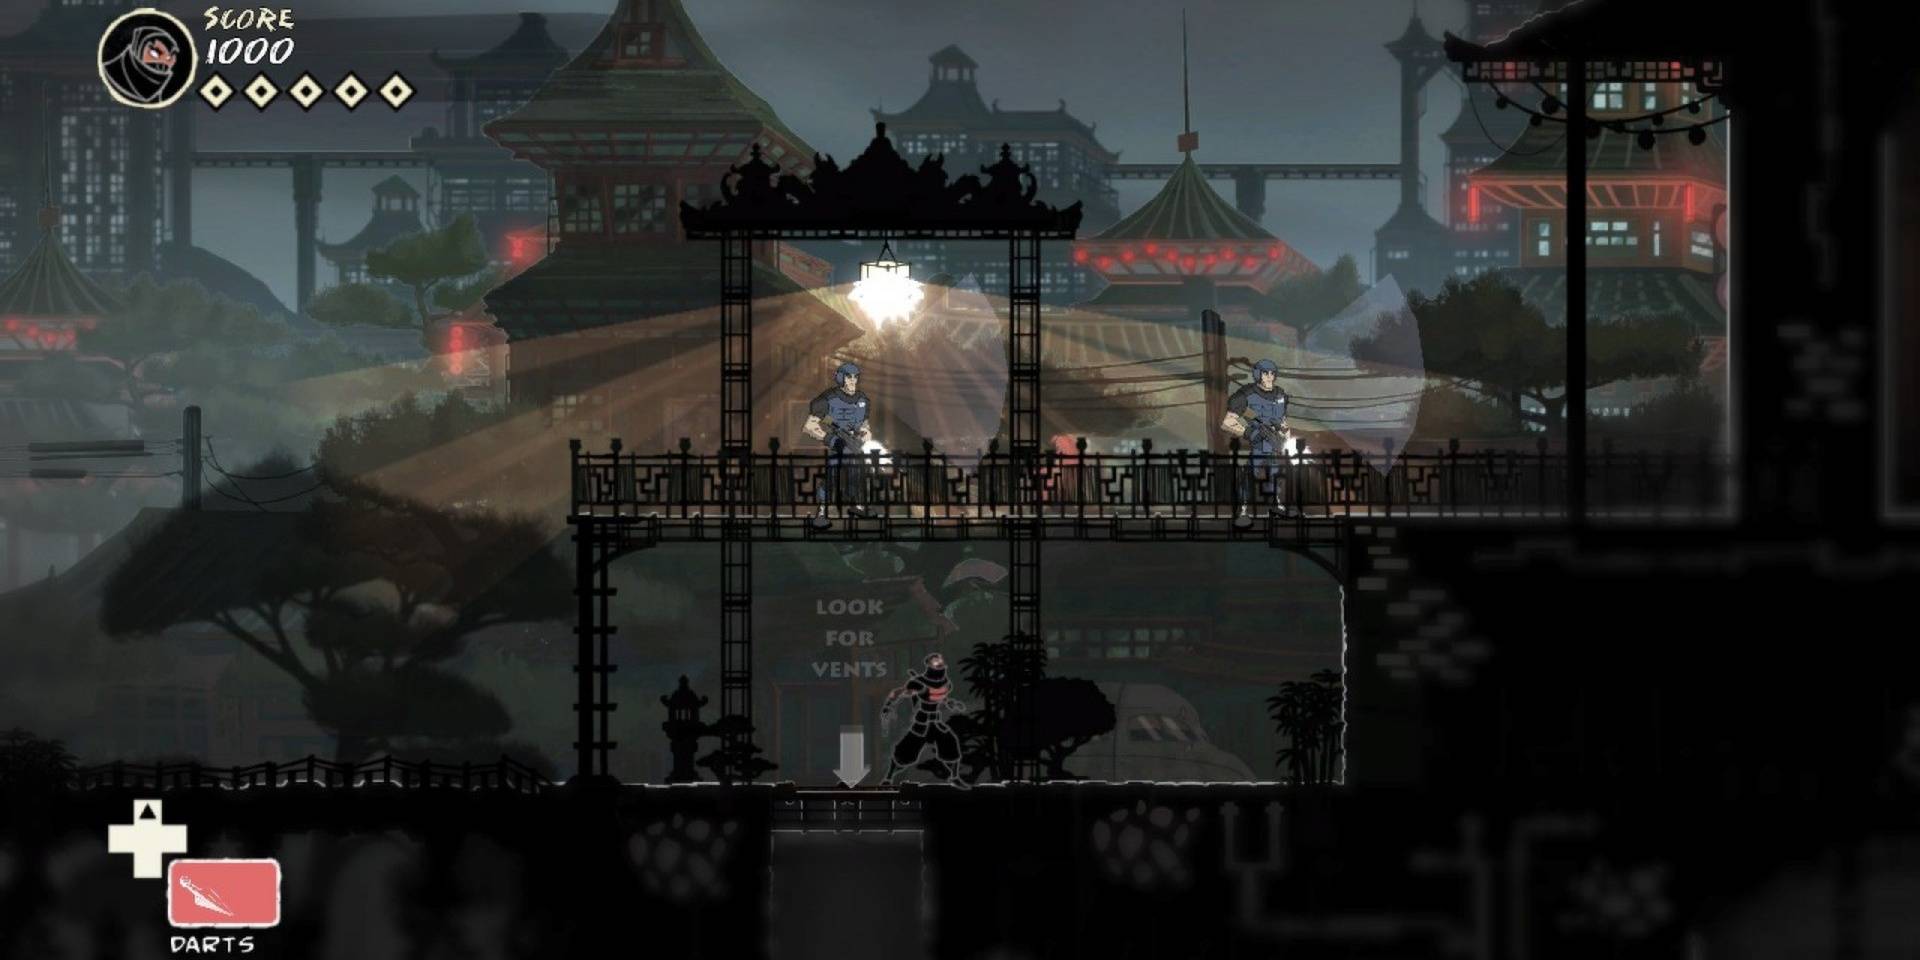 The 15 Best 2d Games On Steam According To Metacritic